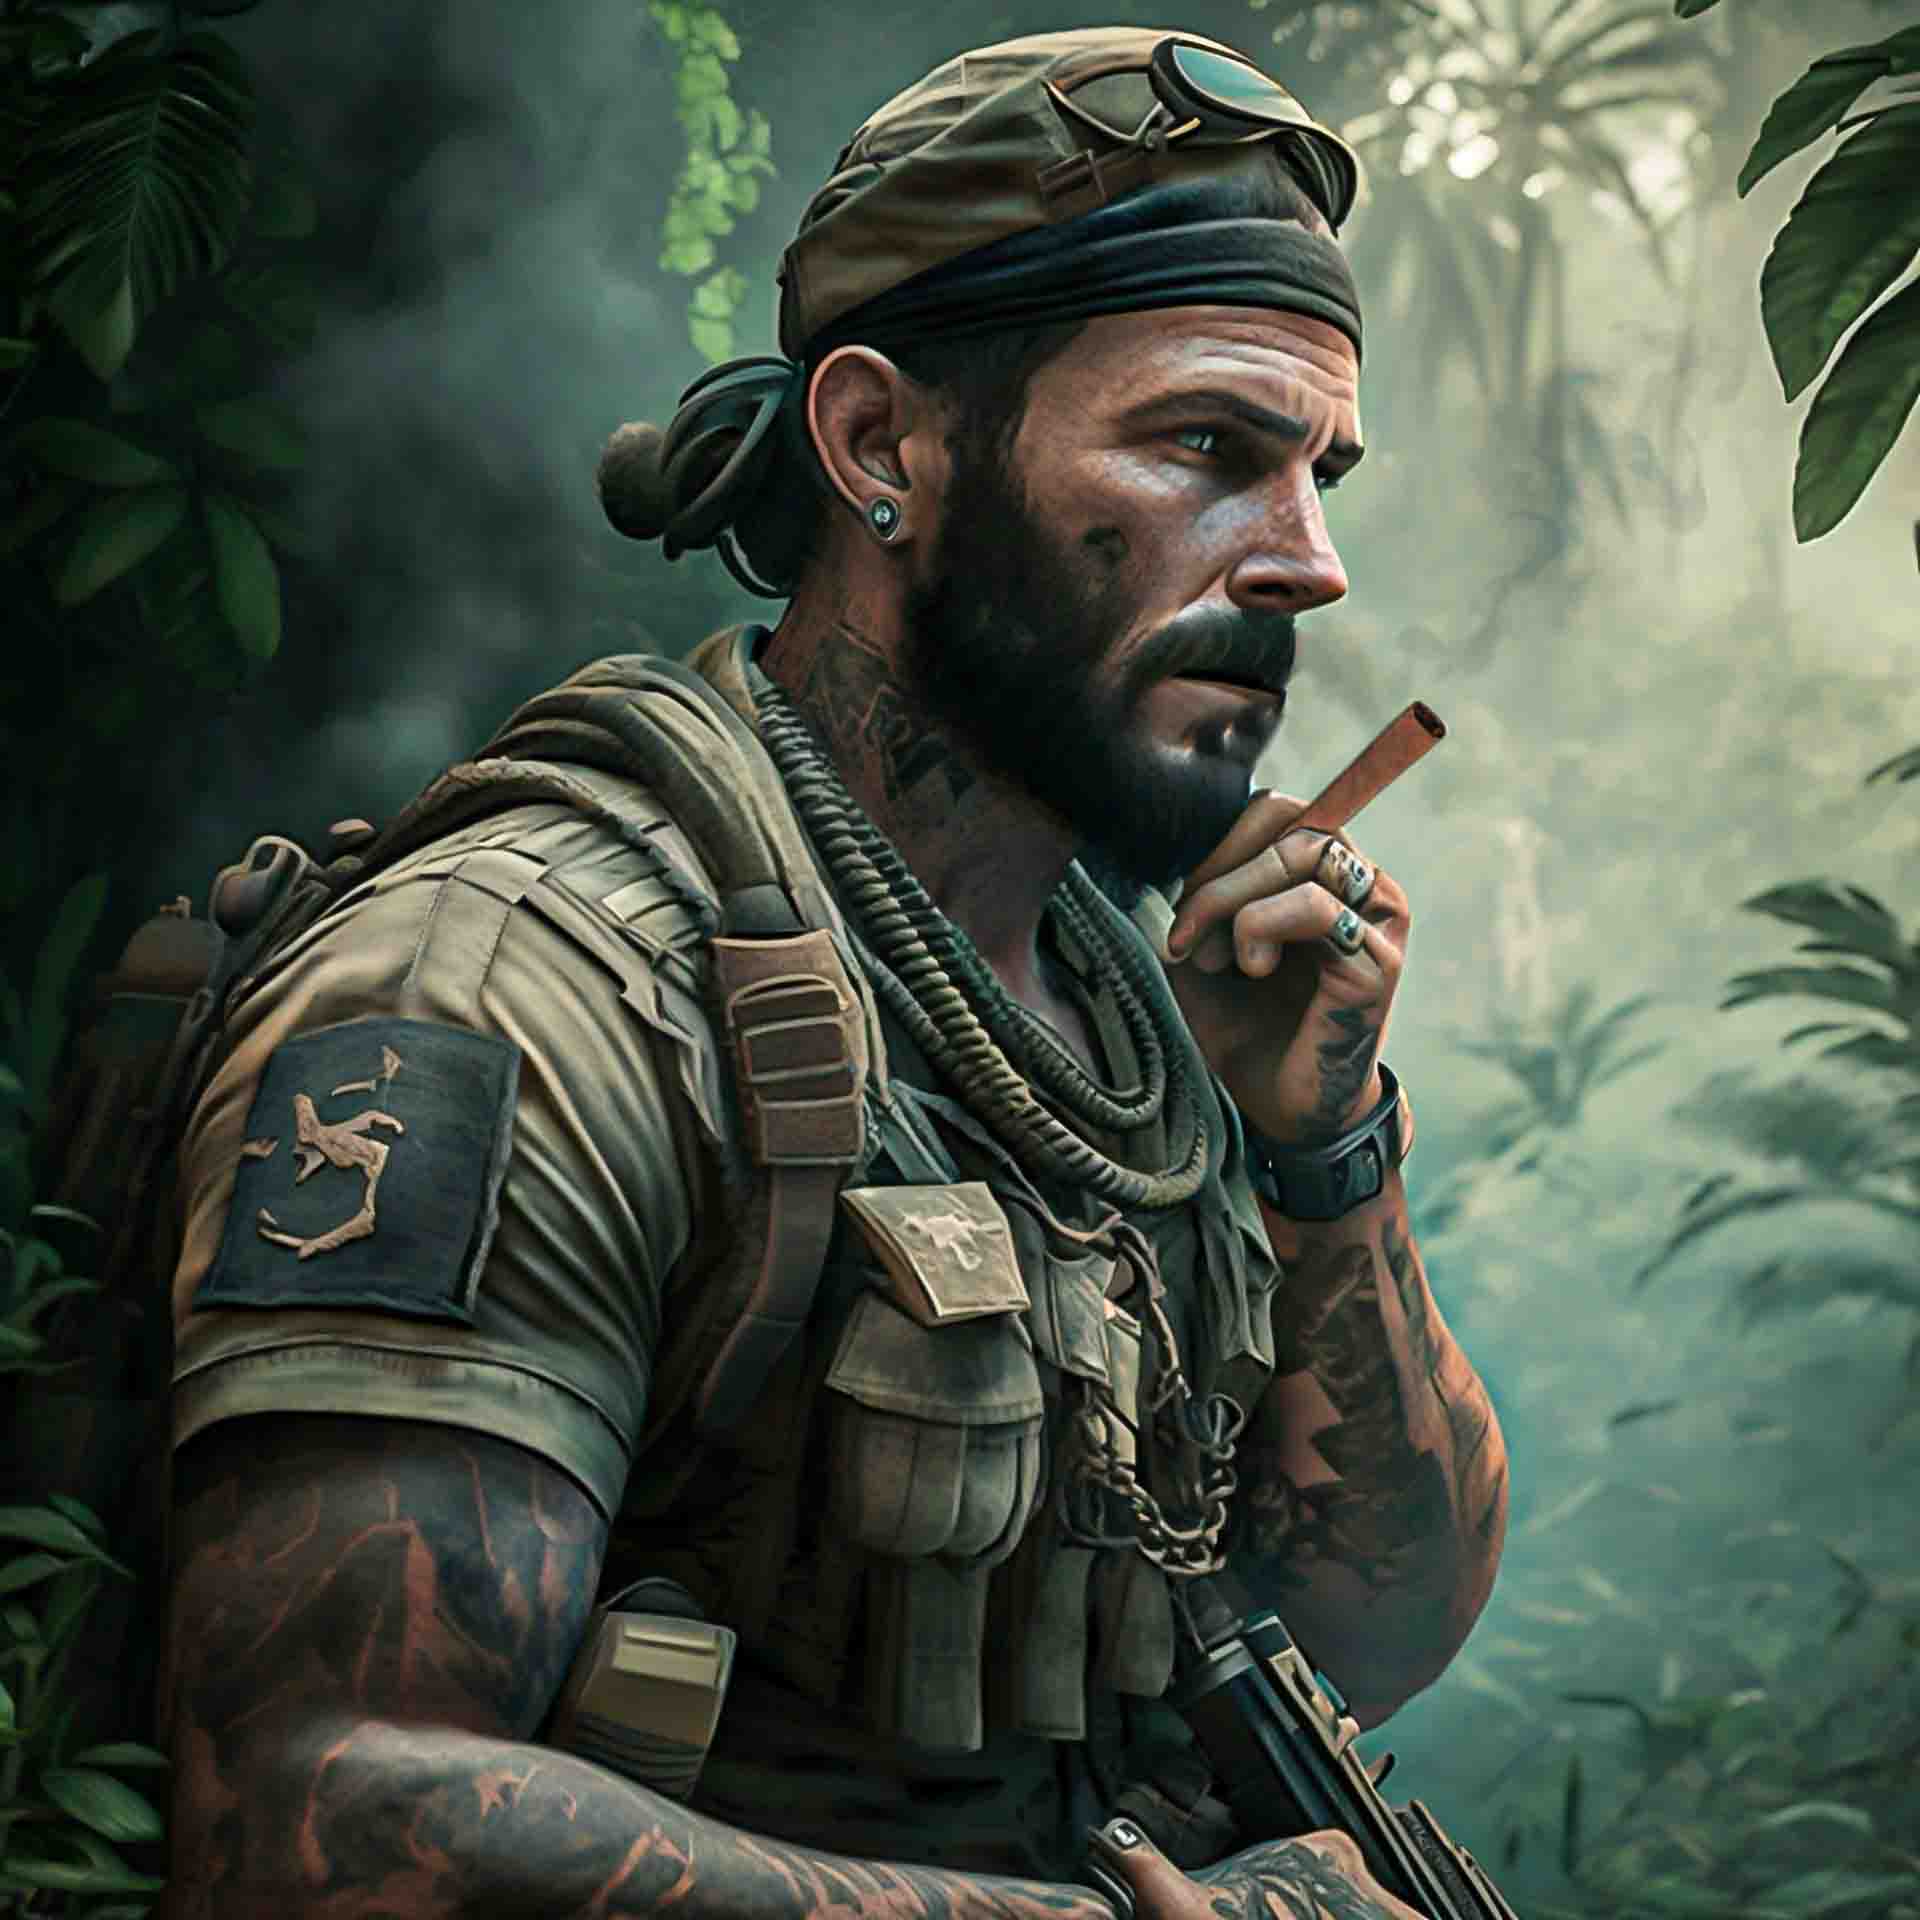 A Beautiful Realistic Gaming Character | Call of Duty | Character preview image.